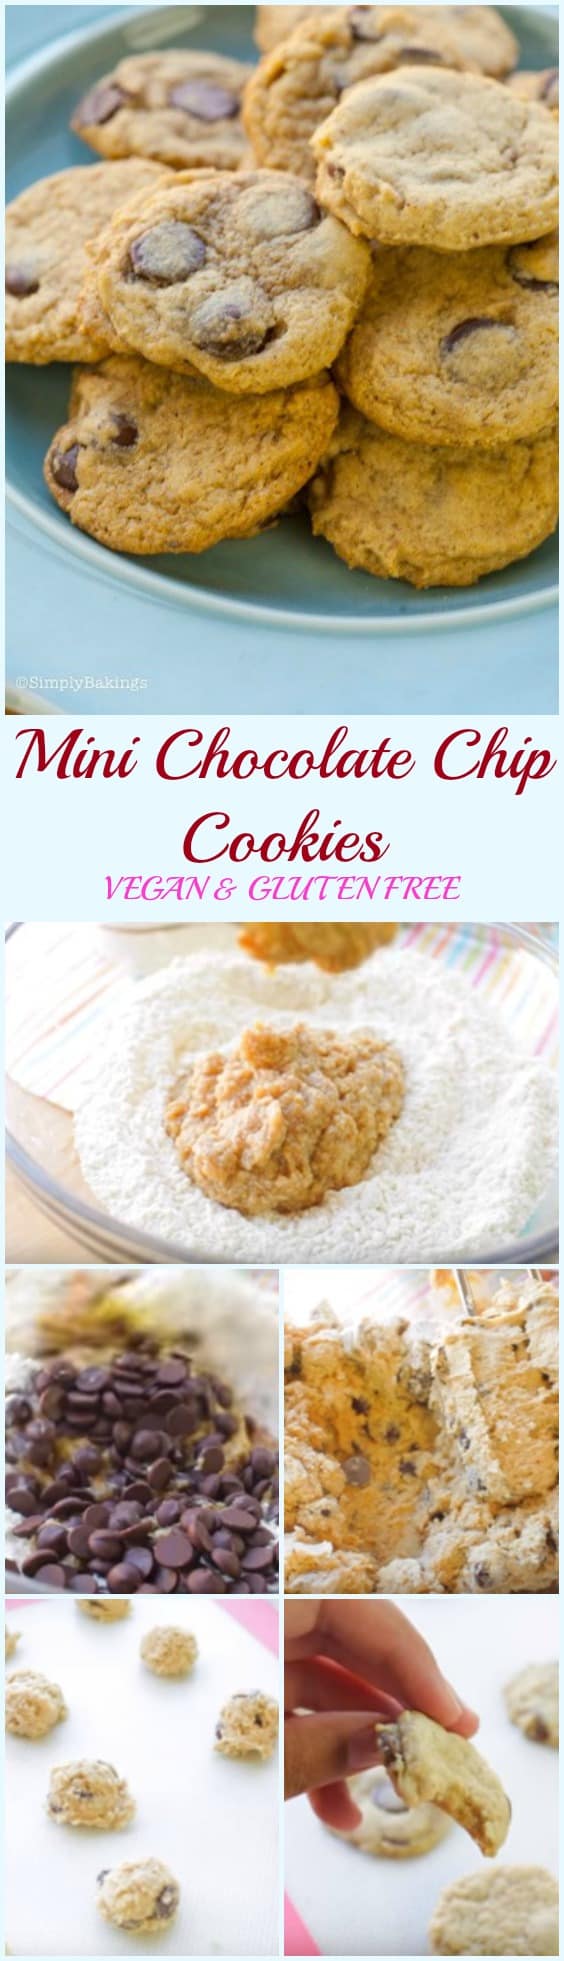 vegan and gluten free mini chocolate chip cookies step by step guide